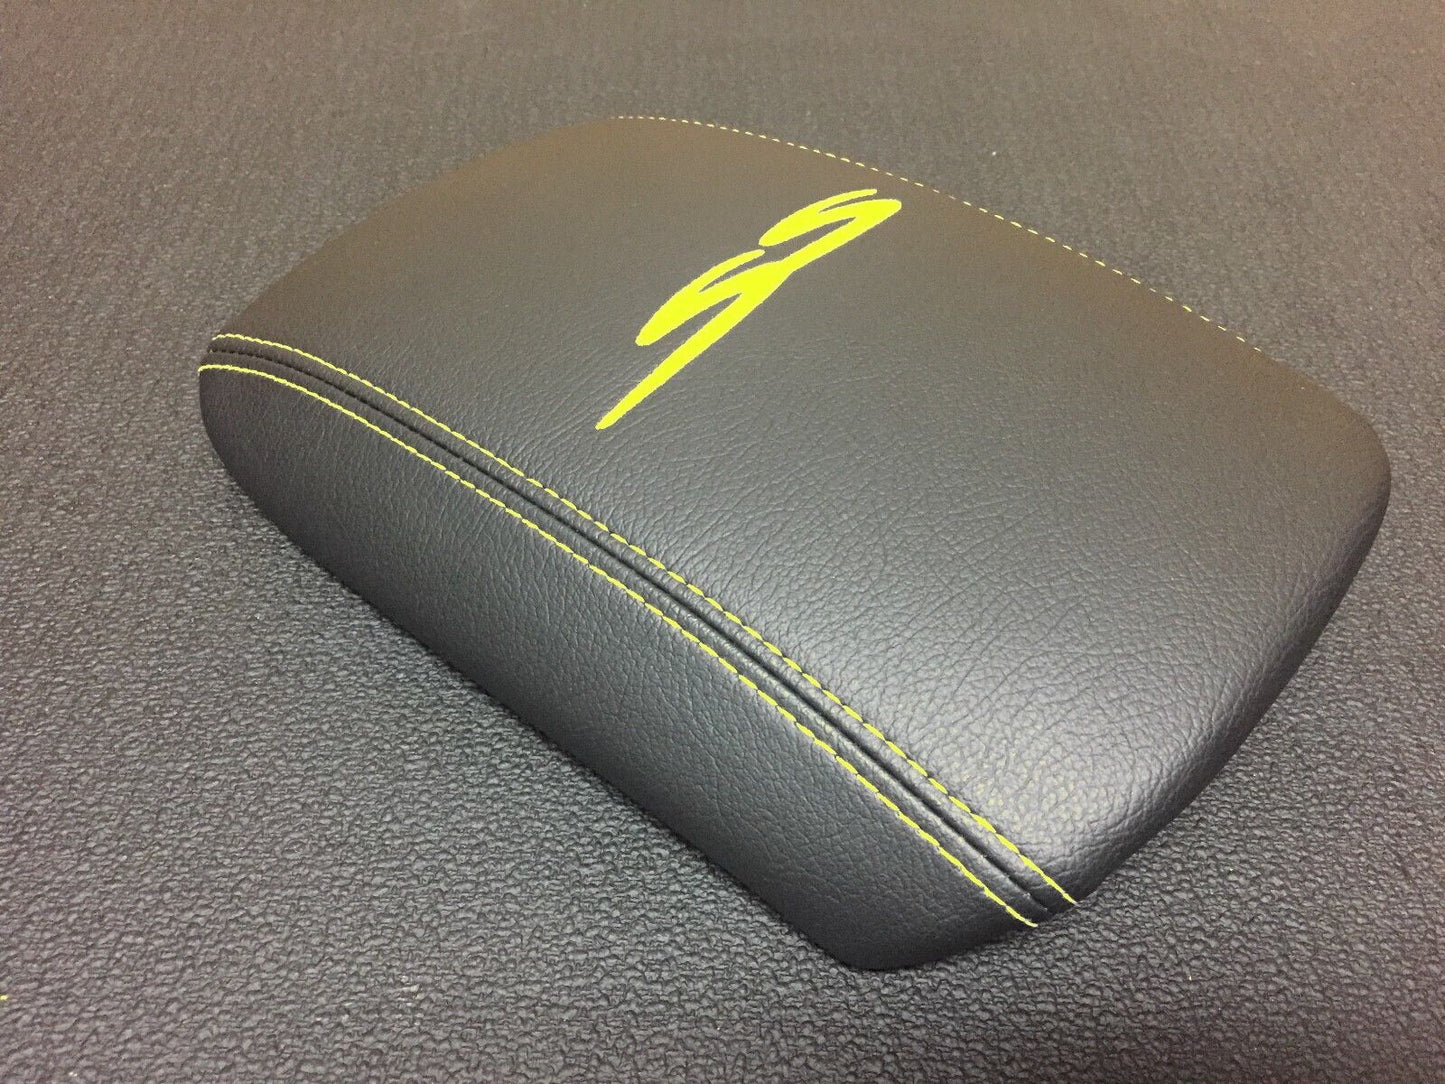 CUSTOM CONSOLE LID ARM REST COVER TO FIT VT VX VU HOLDEN SS FIFTY YELLOW STITCH